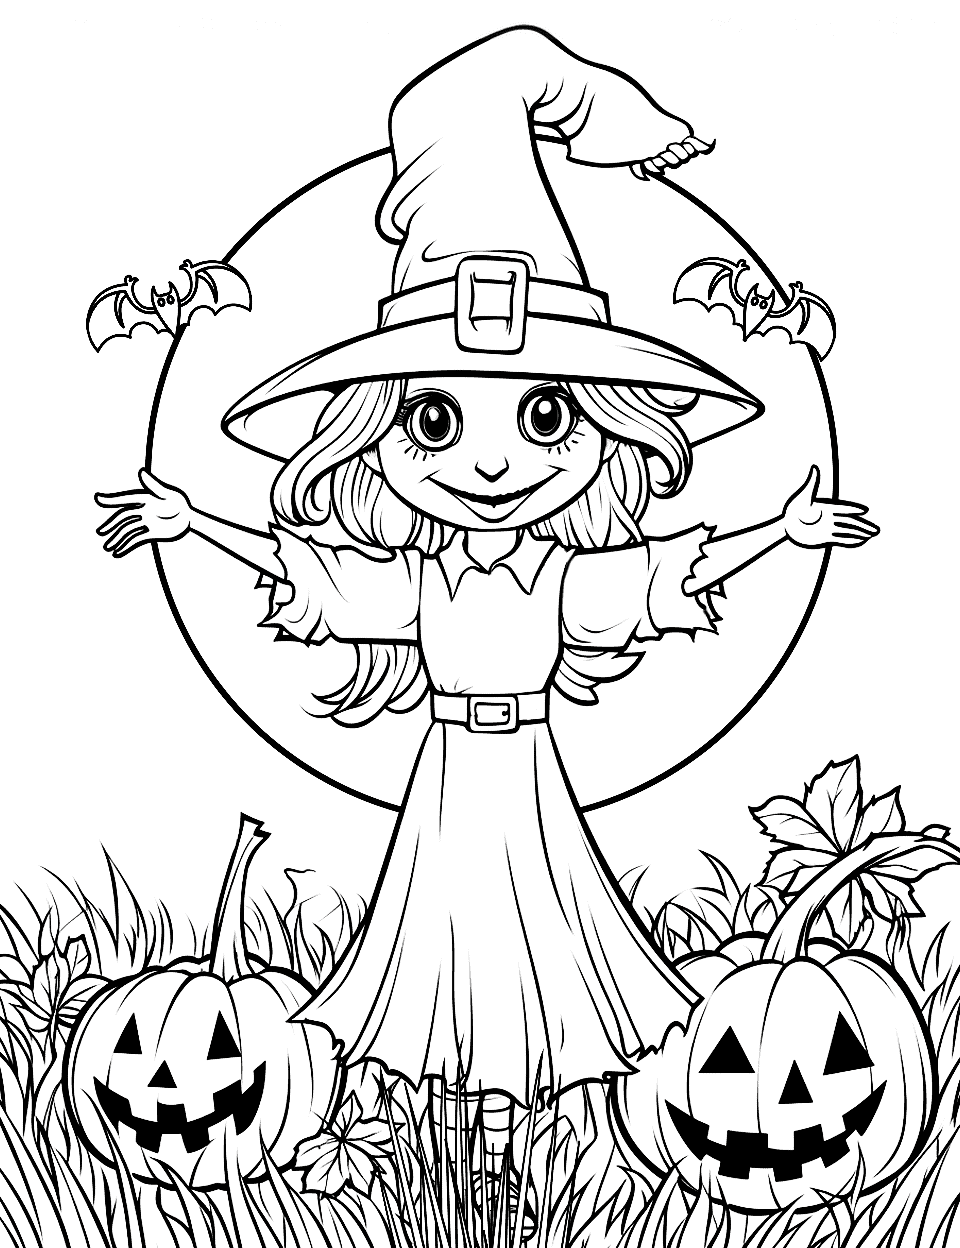 Scarecrow Witch Coloring Page - A scarecrow possessed by a witch conjuring magic in a field.